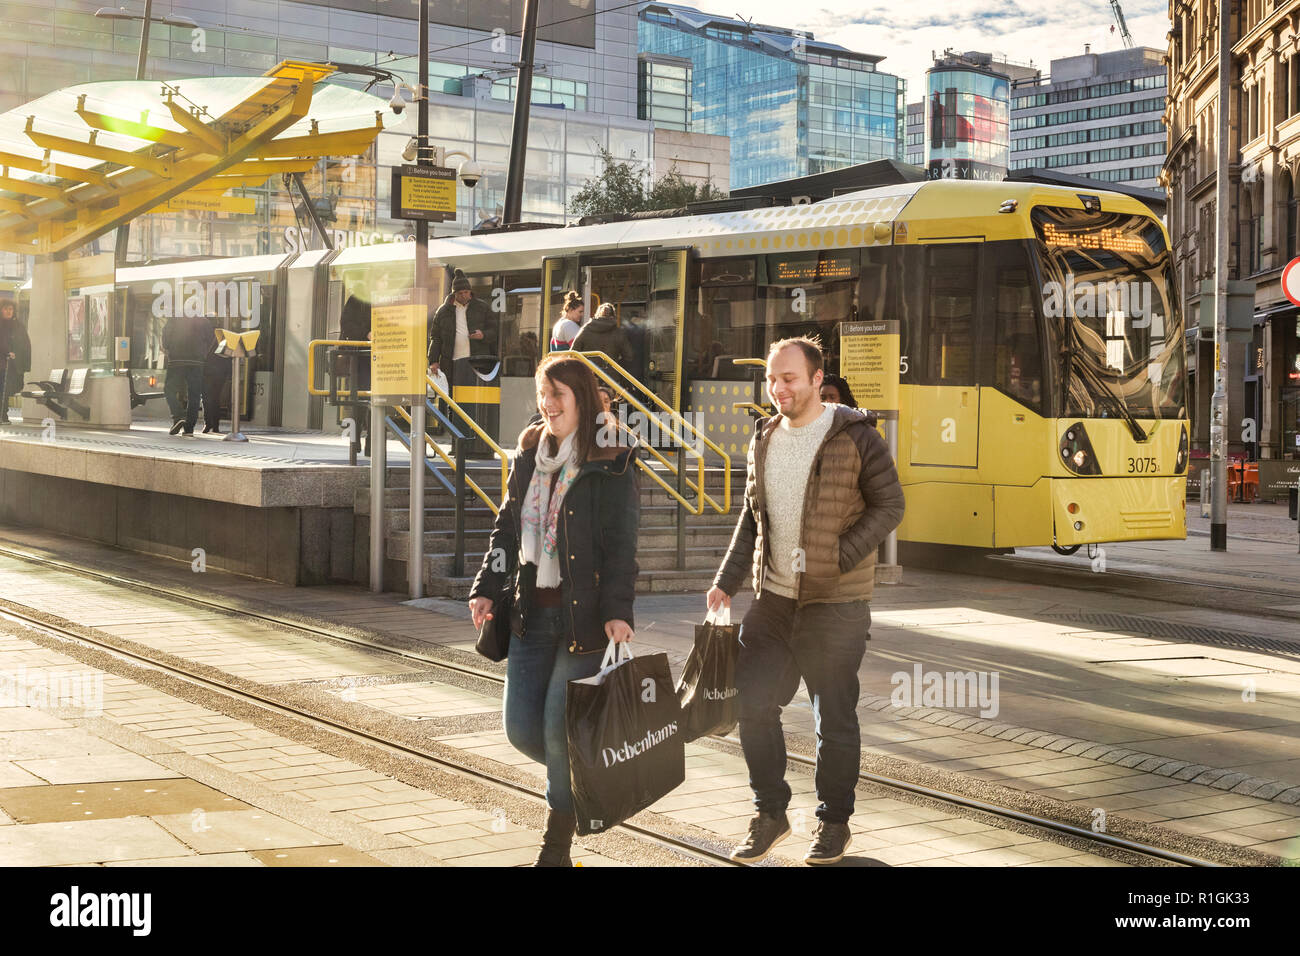 2 November 2018: Manchester, UK - Young couple smiling, with Debenhams shopping bags, in Exchange Square, with a Metrolink tram behind. Lots of flare. Stock Photo